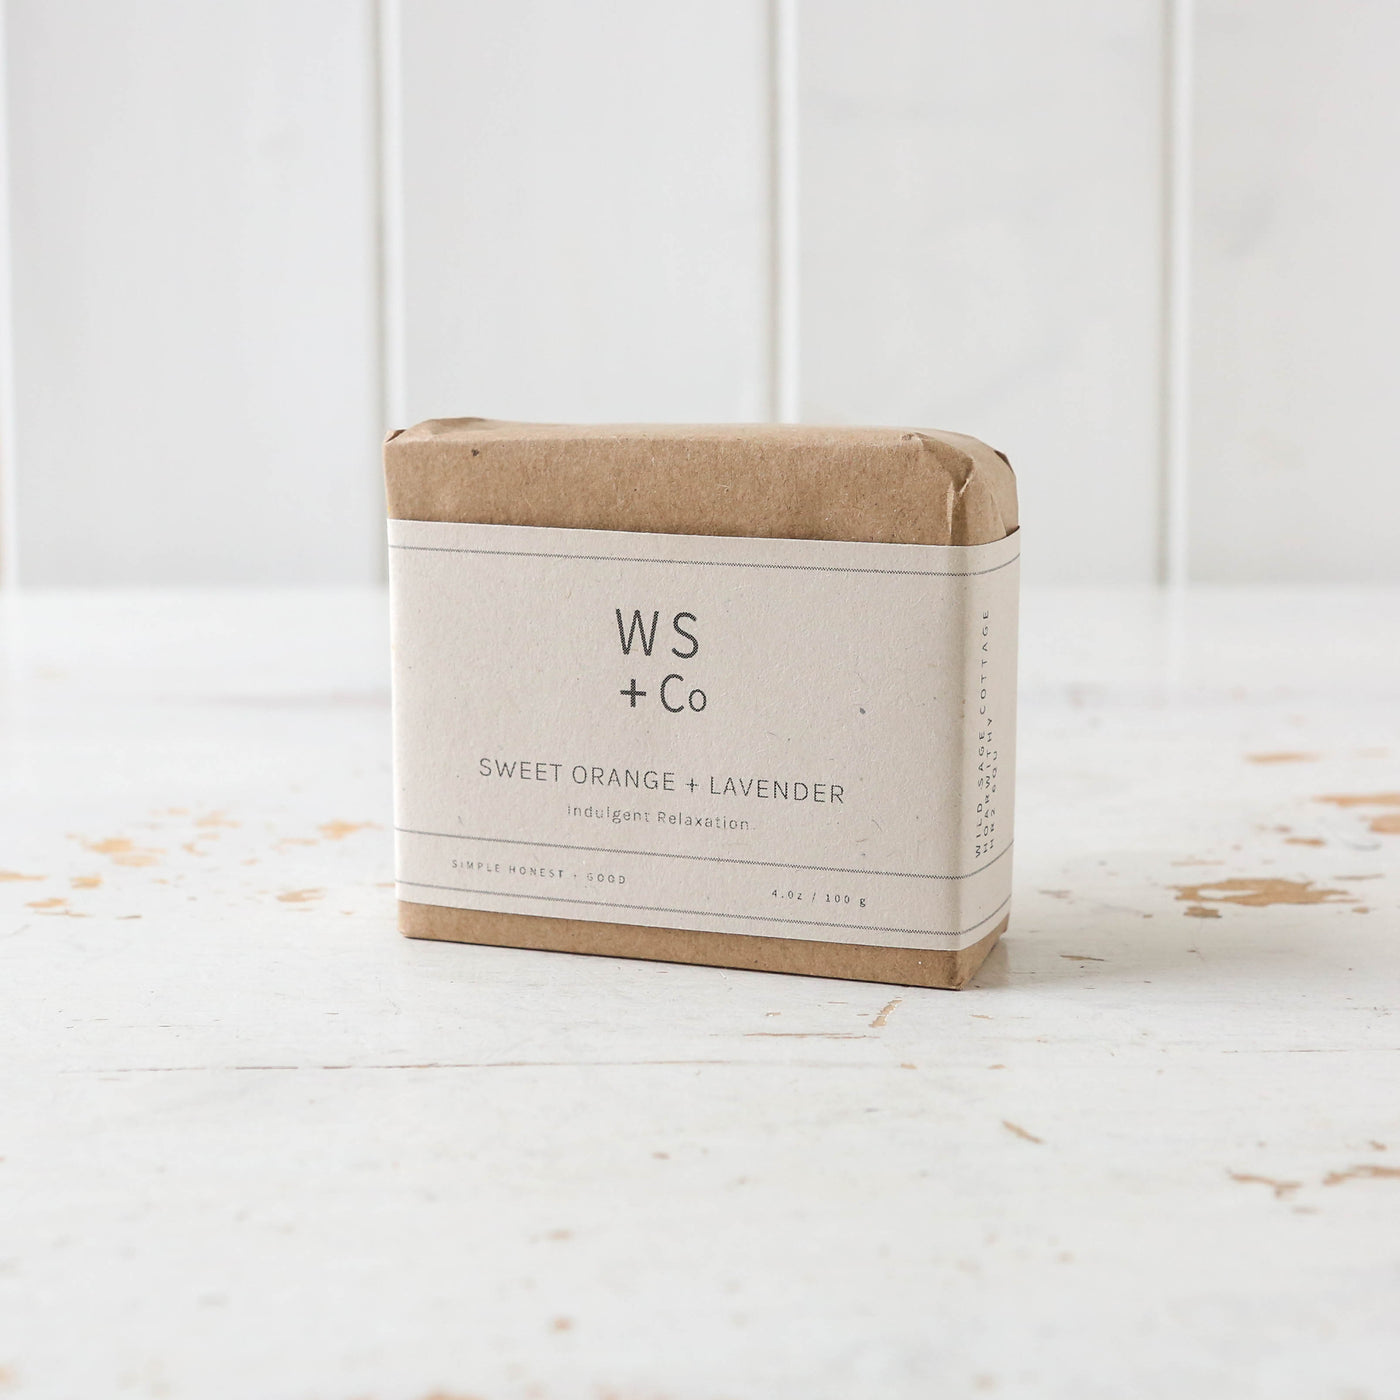 Natural Soap Bar by Wild Sage + Co